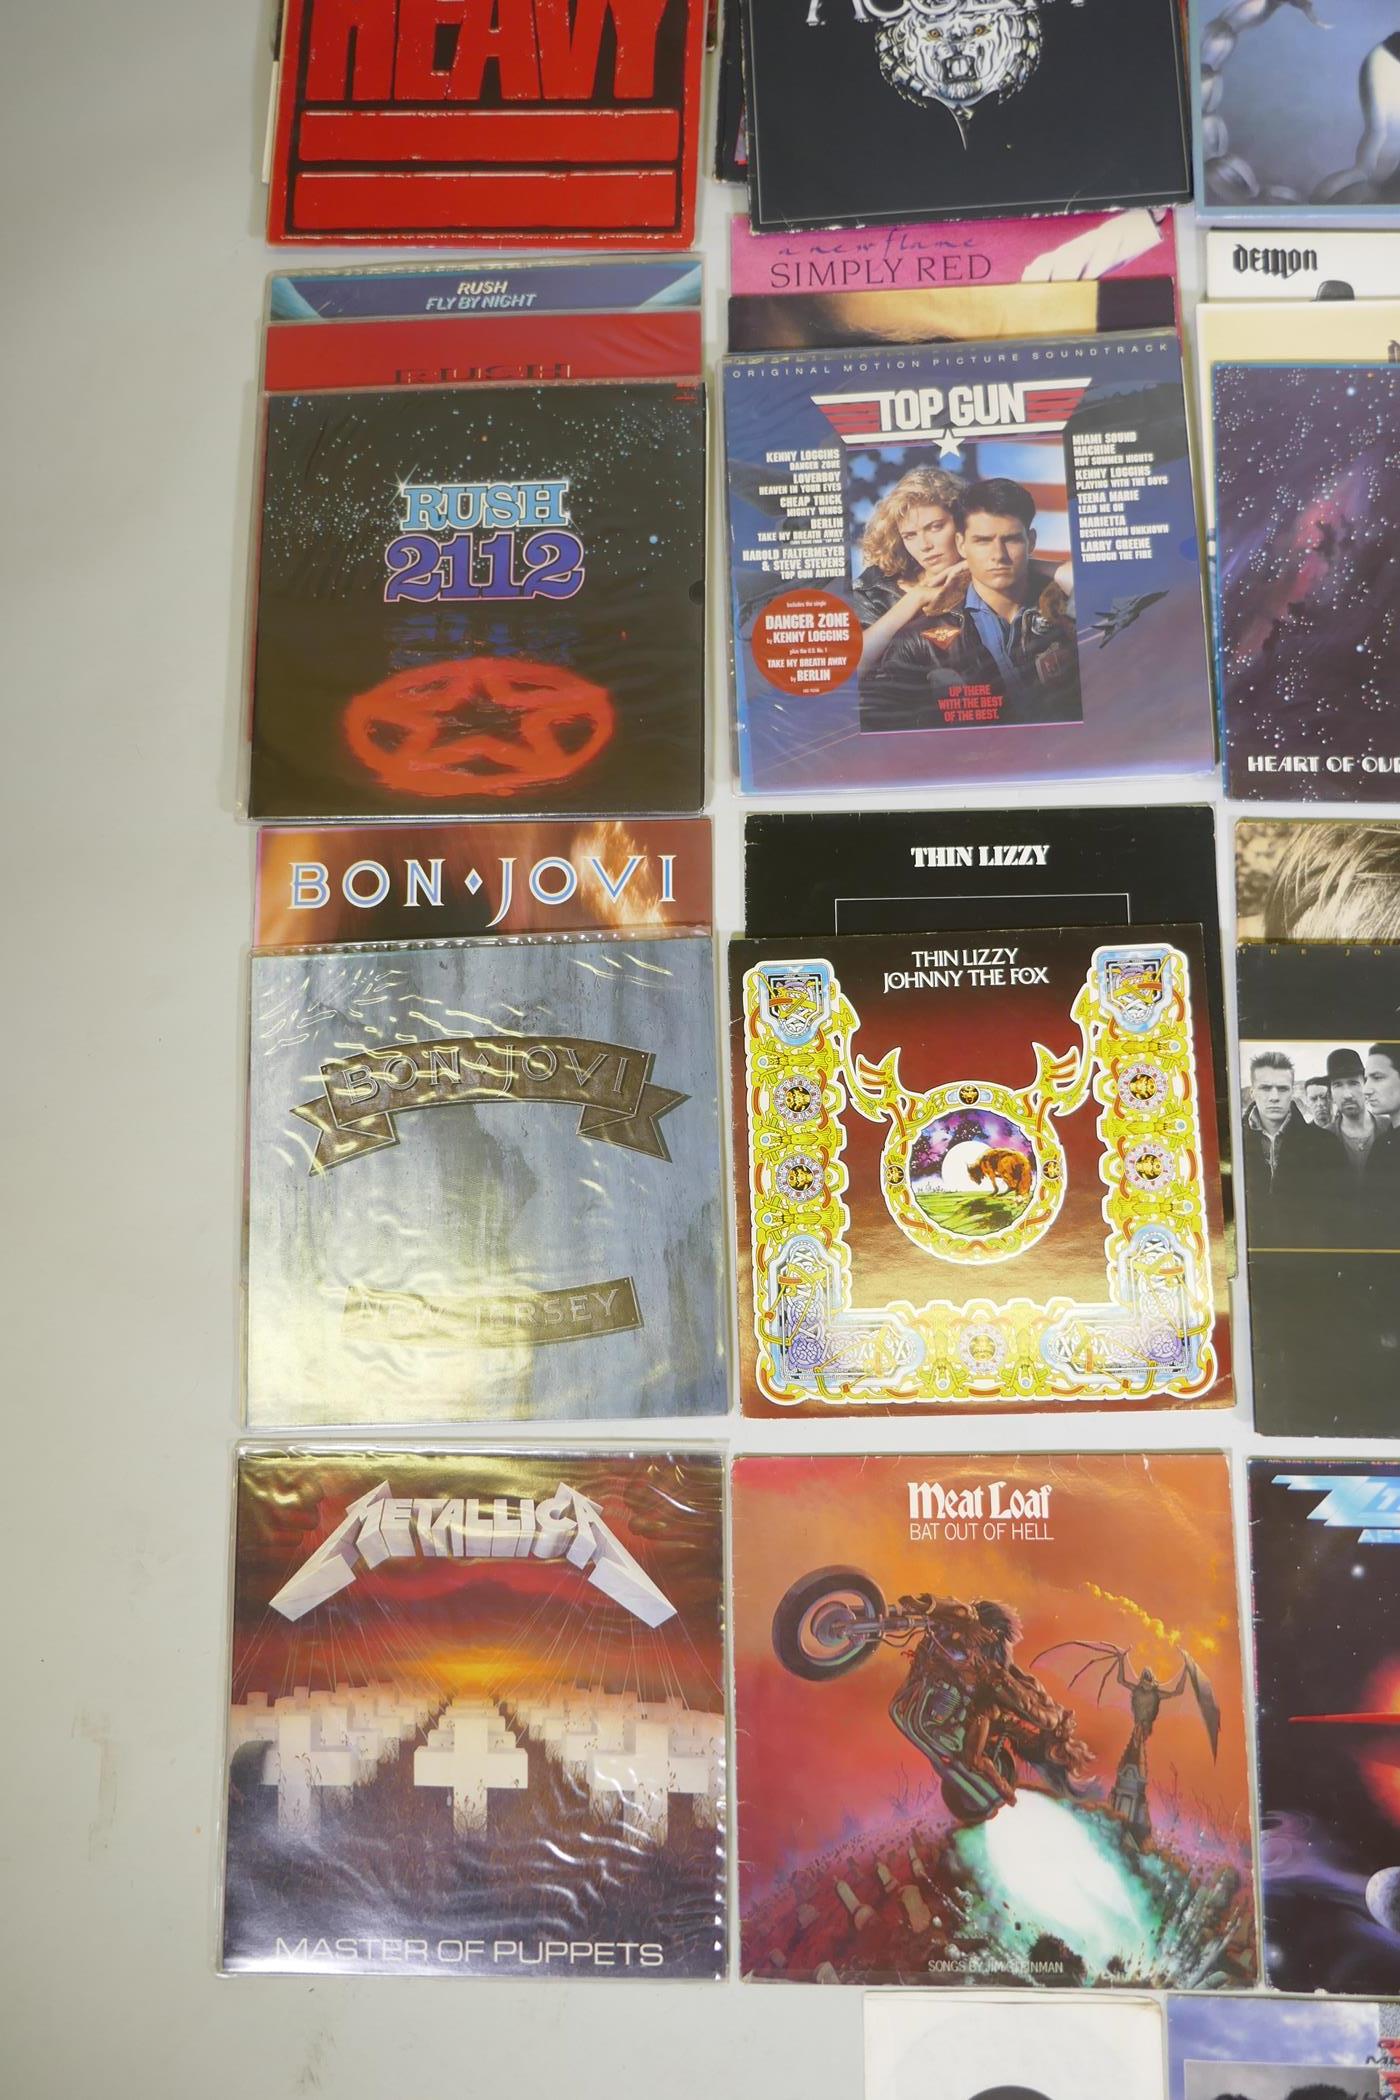 A quantity of 12" metal and rock vinyl LPs including Metallica, Meatloaf, Thin Lizzy, Motorhead, - Image 10 of 16